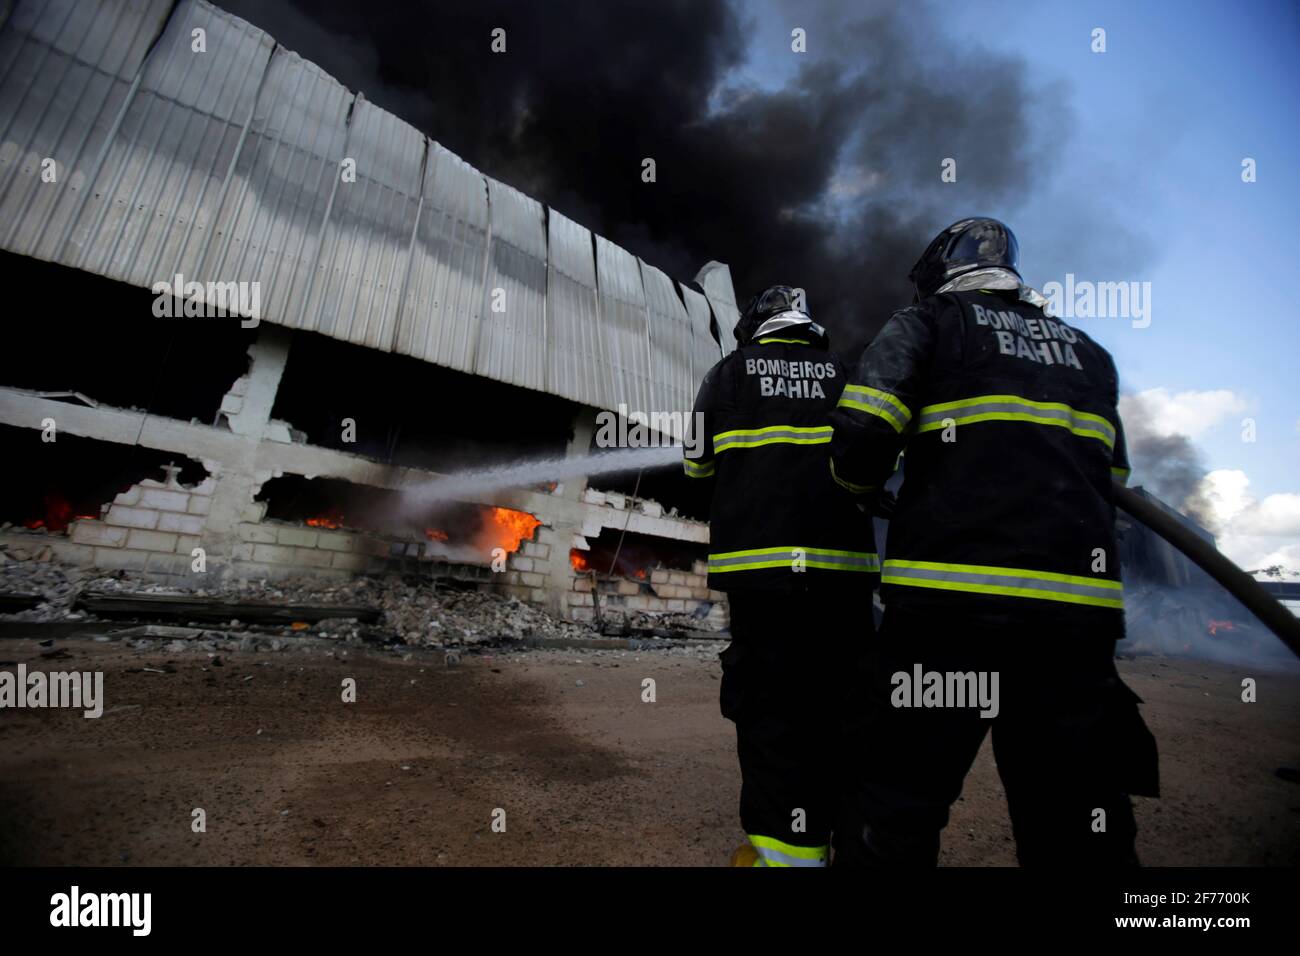 sao sebastiao do passe, bahia / brazil - may 31, 2019: Firefighters fire fighting at tire recycling factory in the city of Sao Sebastiao do Passe. *** Stock Photo